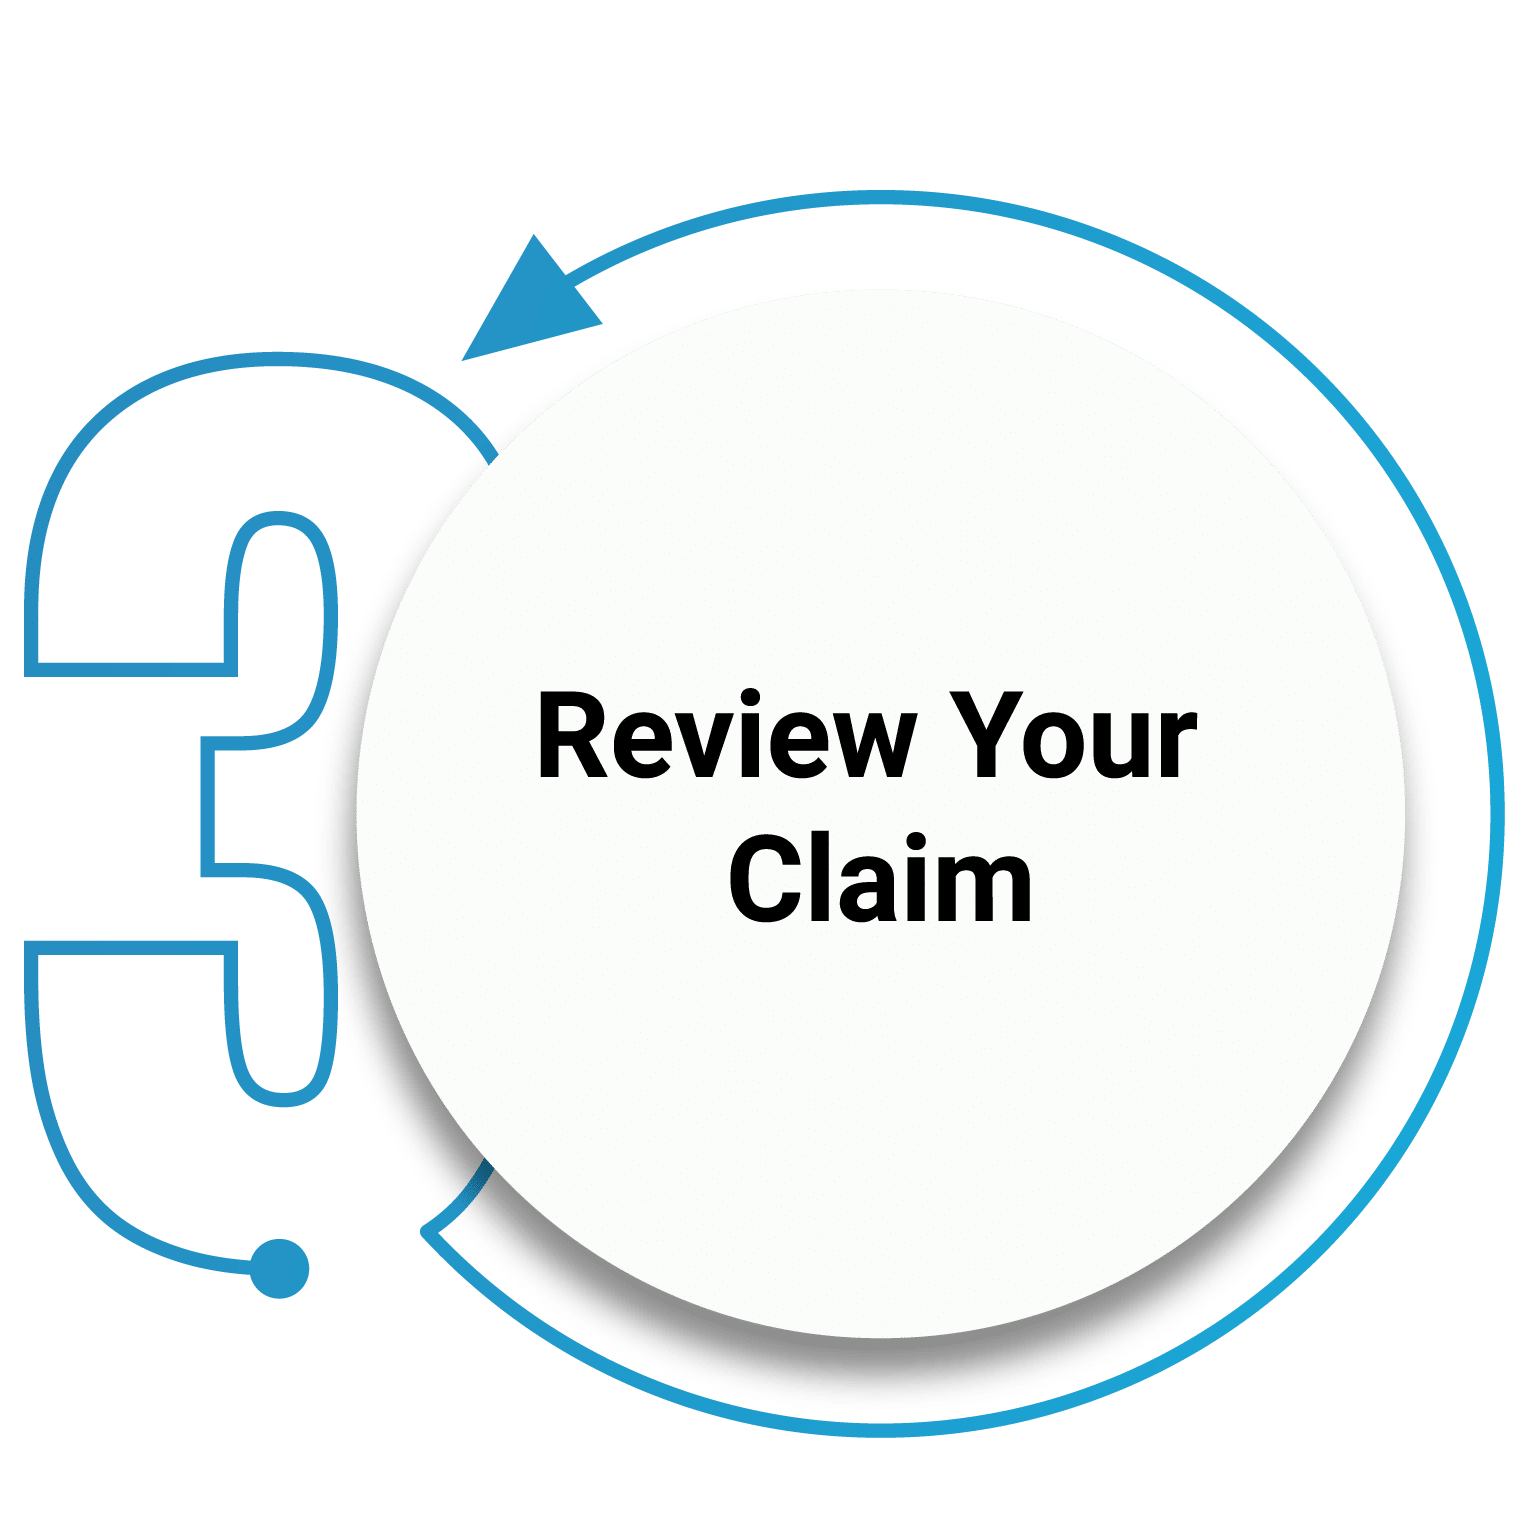 Review Your Claim